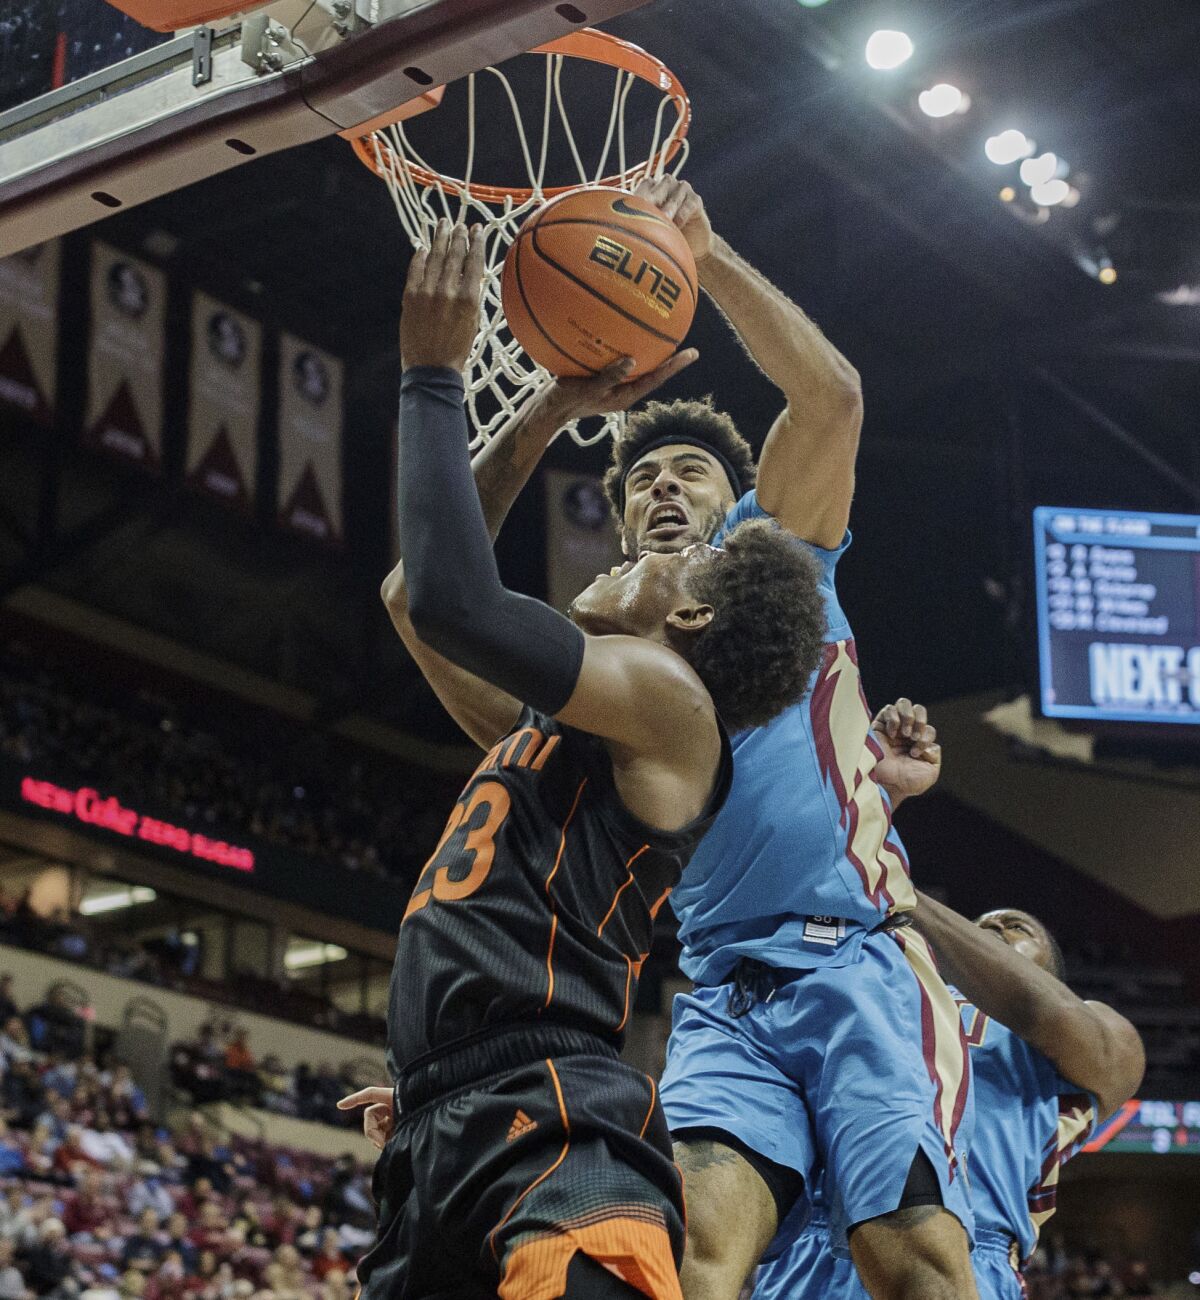 Miami guard Kameron McGusty (23) is blocked by Florida State guard Anthony Polite (2) during an NCAA college basketball game at the Tucker Civic Center on Tuesday, Jan. 11, 2022, Tallahassee, Fla. (Alicia Devine/Tallahassee Democrat via AP)